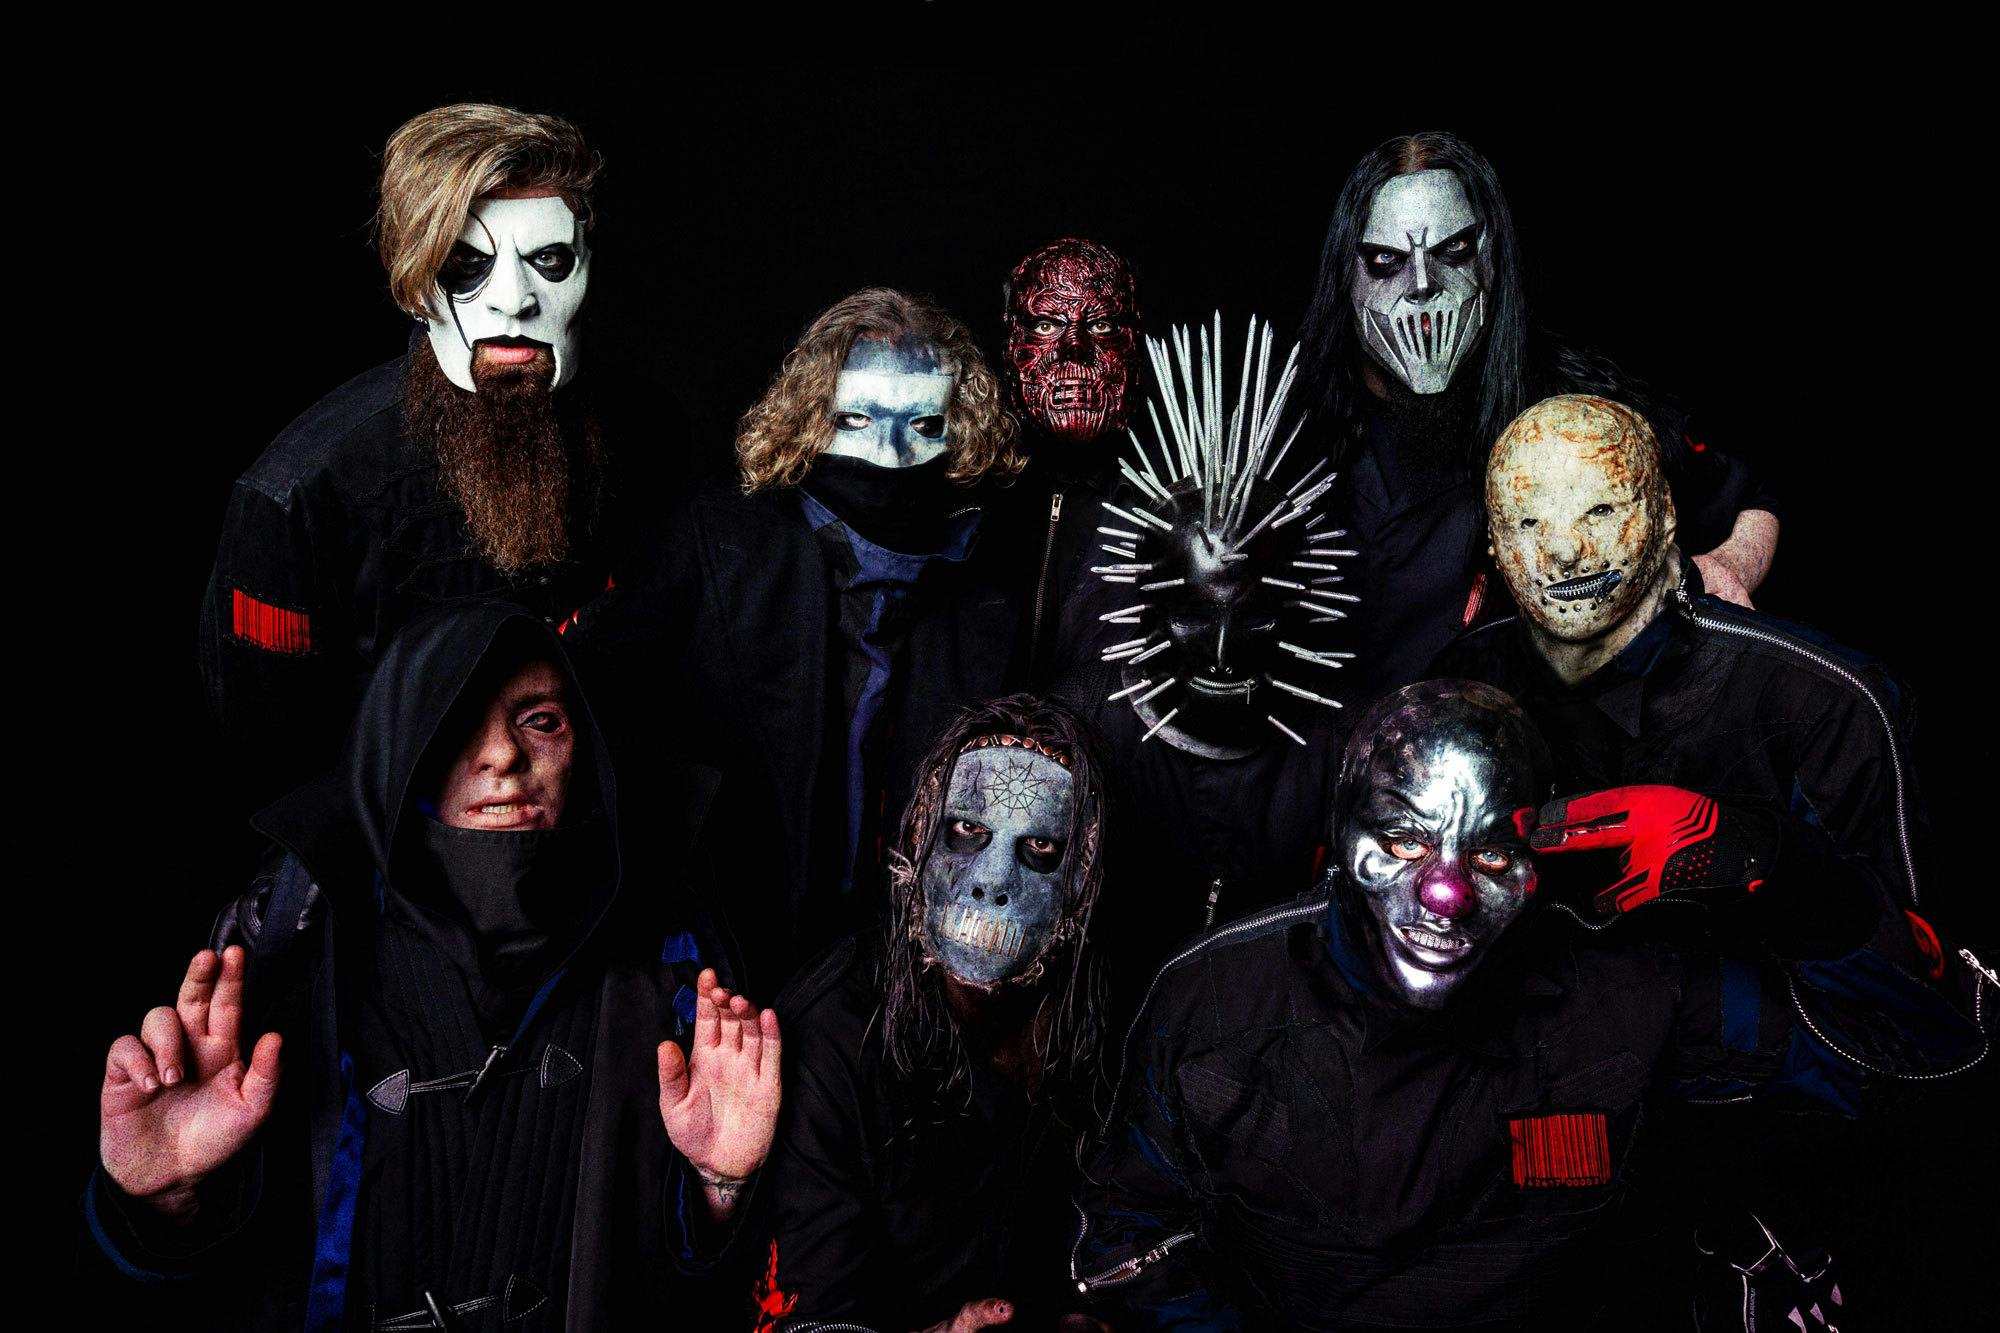 Cryptic Slipknot Poster Appears At Download Festival